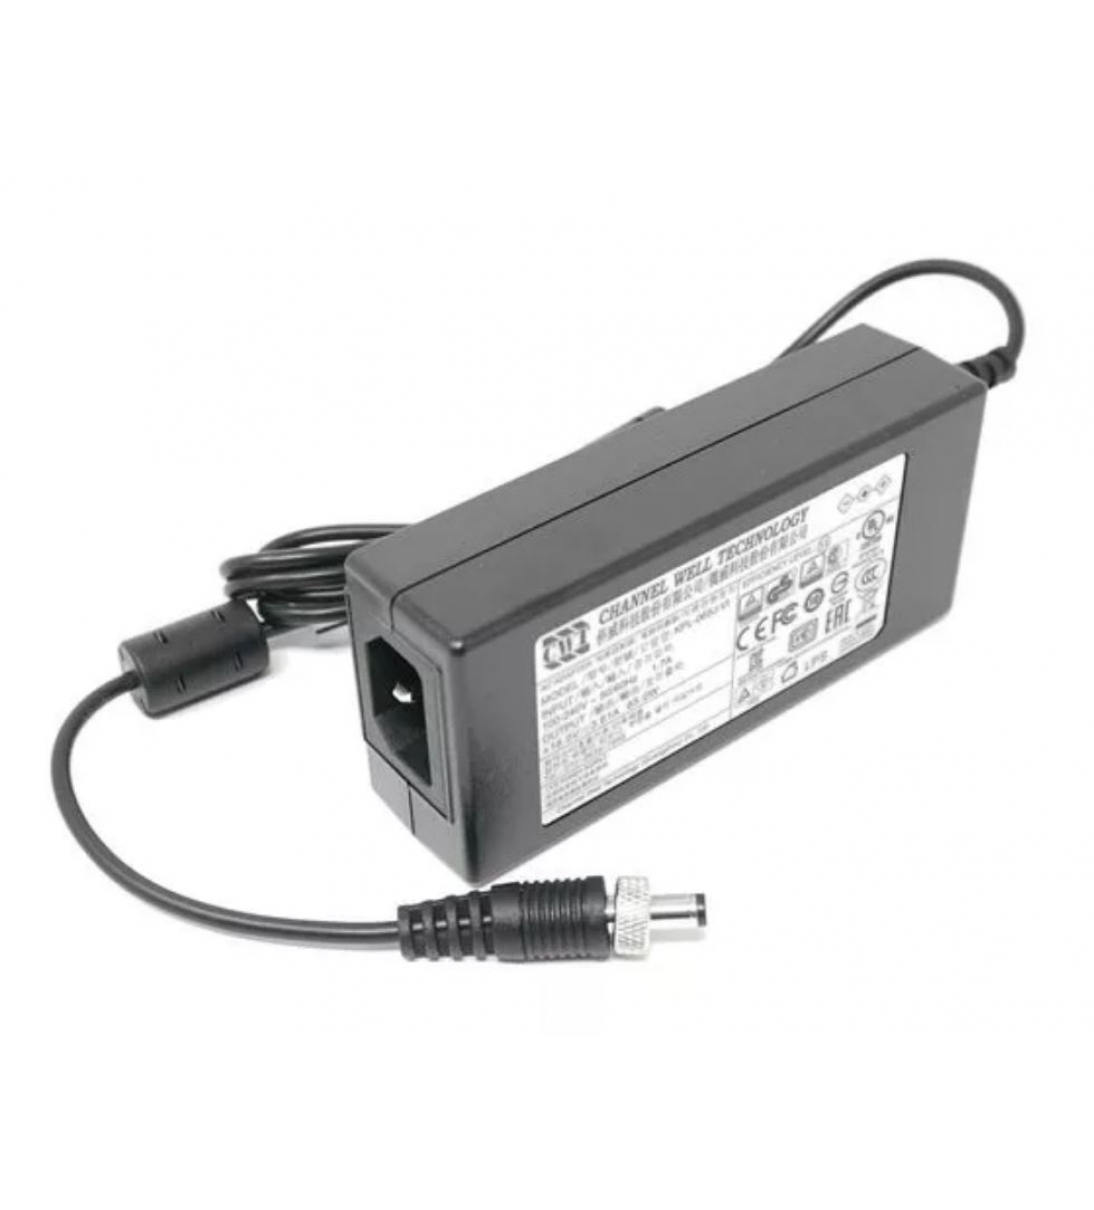 ANTELOPE PSM-AC/DC Power Adapter 65W/18V/DC